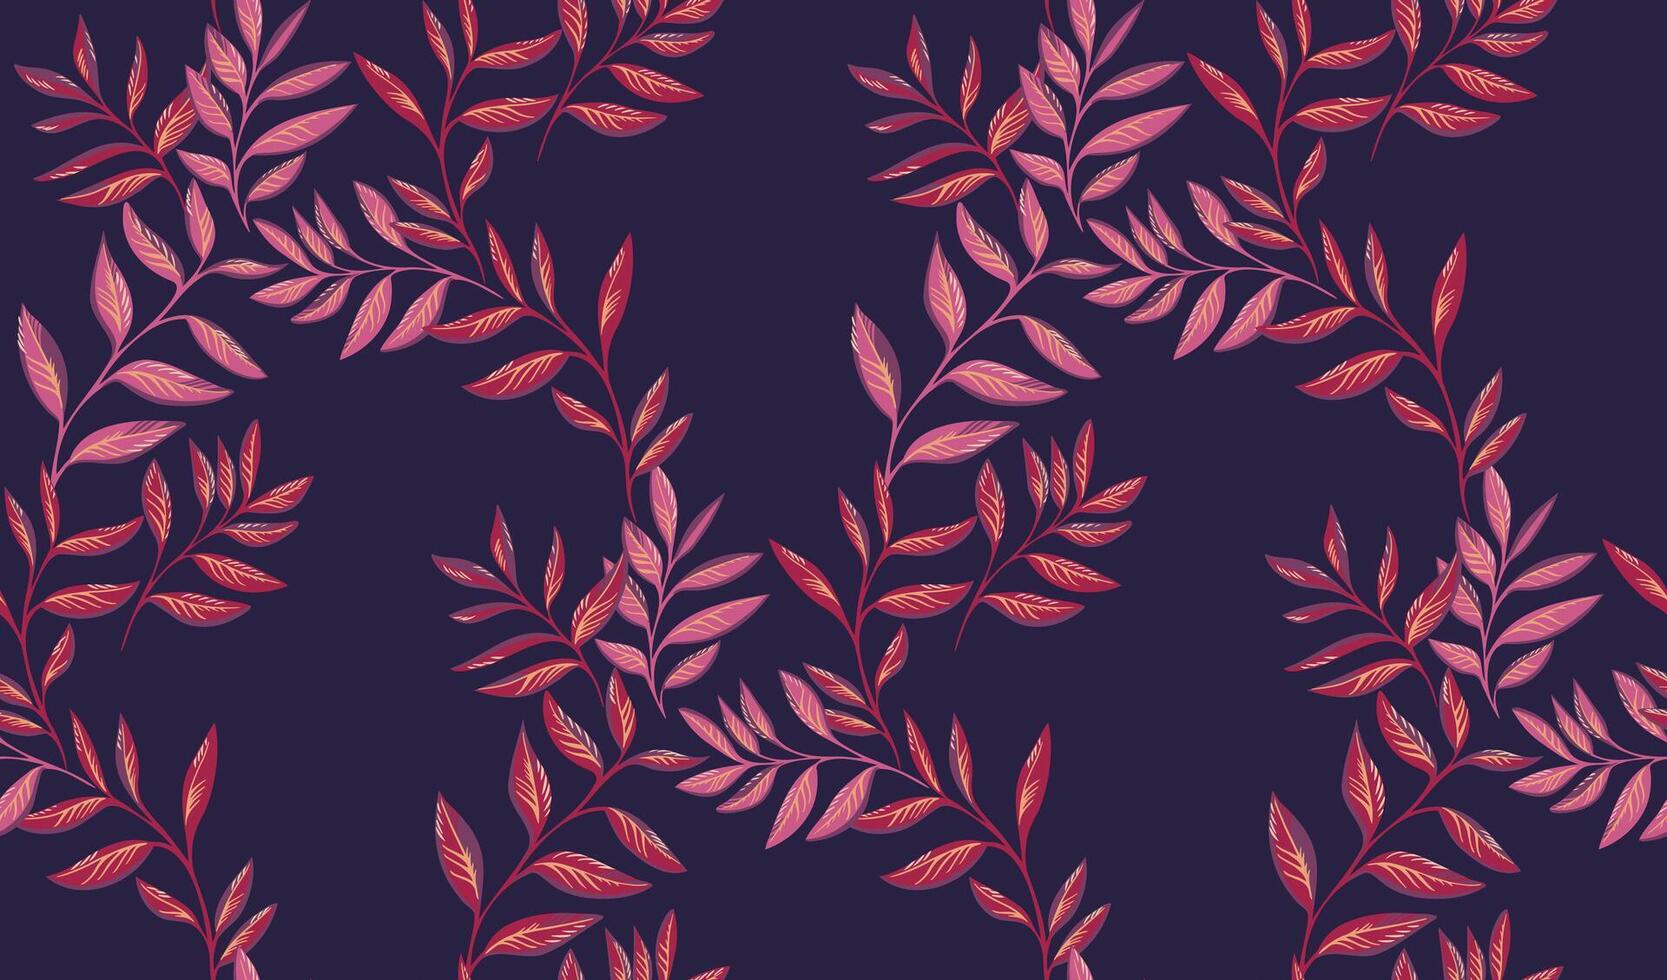 Bright elegance foliage intertwined seamless pattern on ad dark blue background. Abstract, artistic, garden leaves stem printing. Vector hand drawing. Template for designs, textile, fashion, fabric